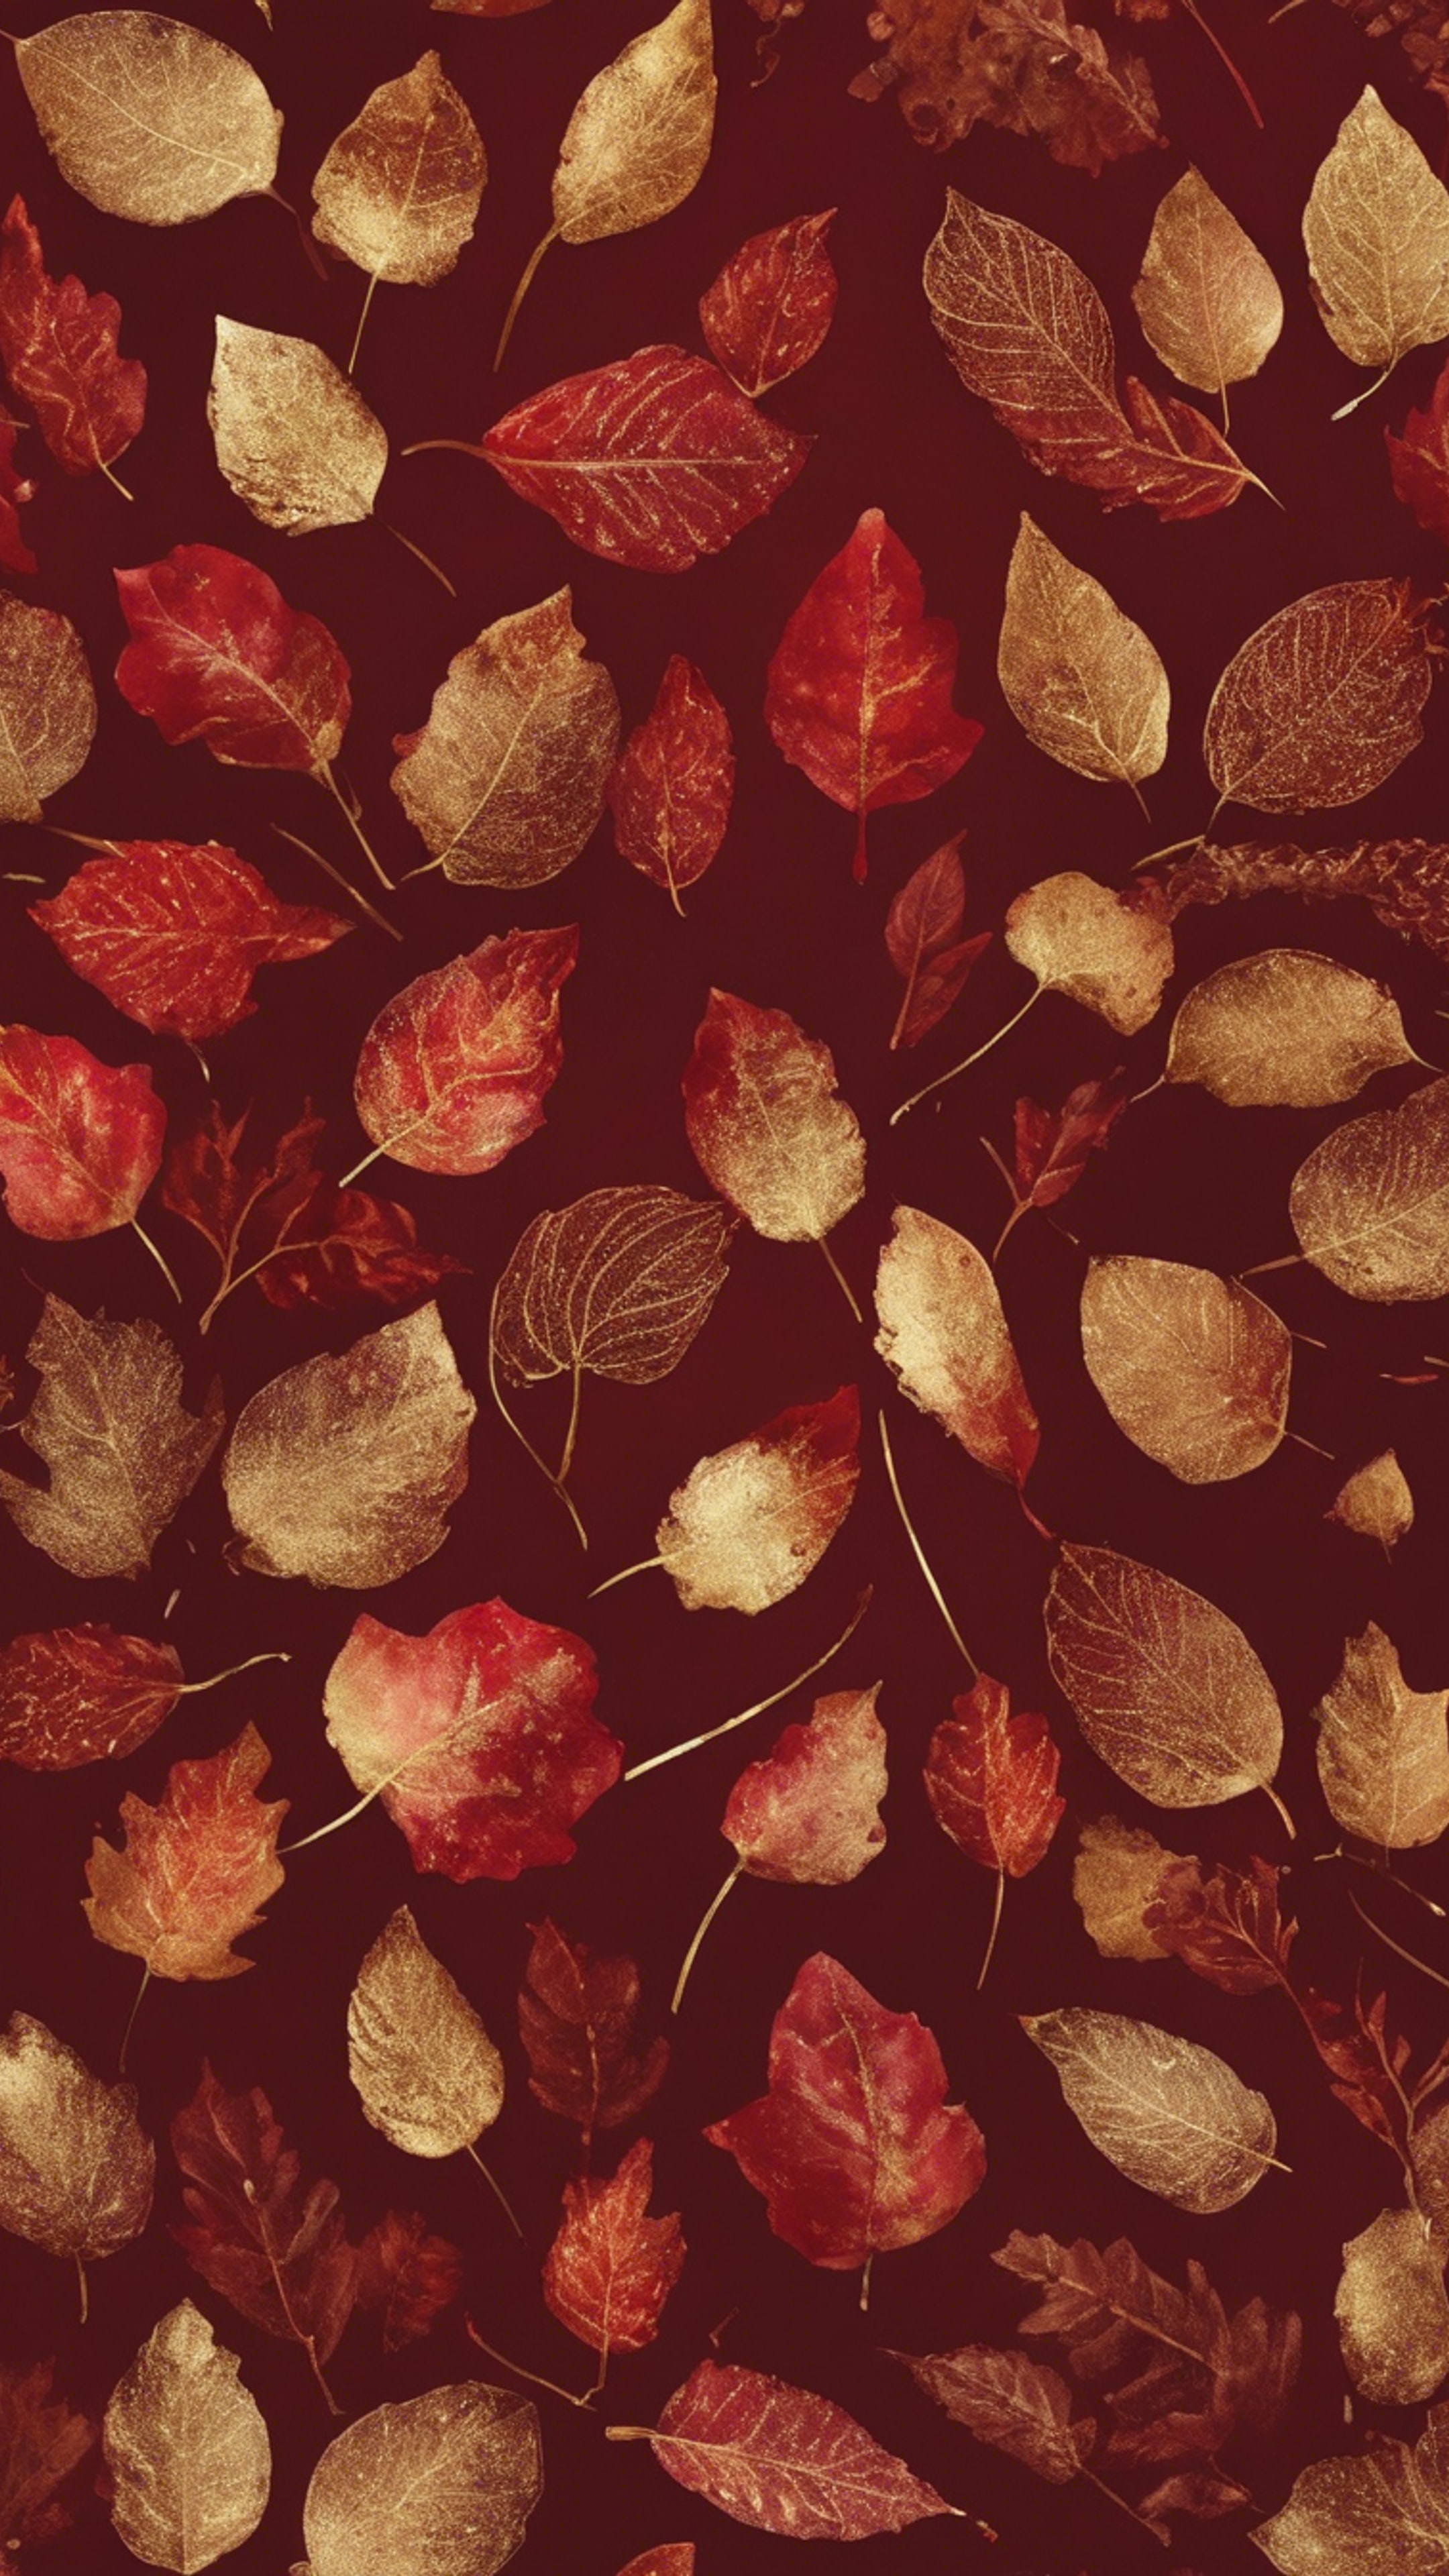 Exquisite patterns inspired by autumn leaves falling on lush red velvet with delicate gold accents. Wallpaper[ffa0c6ed7c5a4575a207]